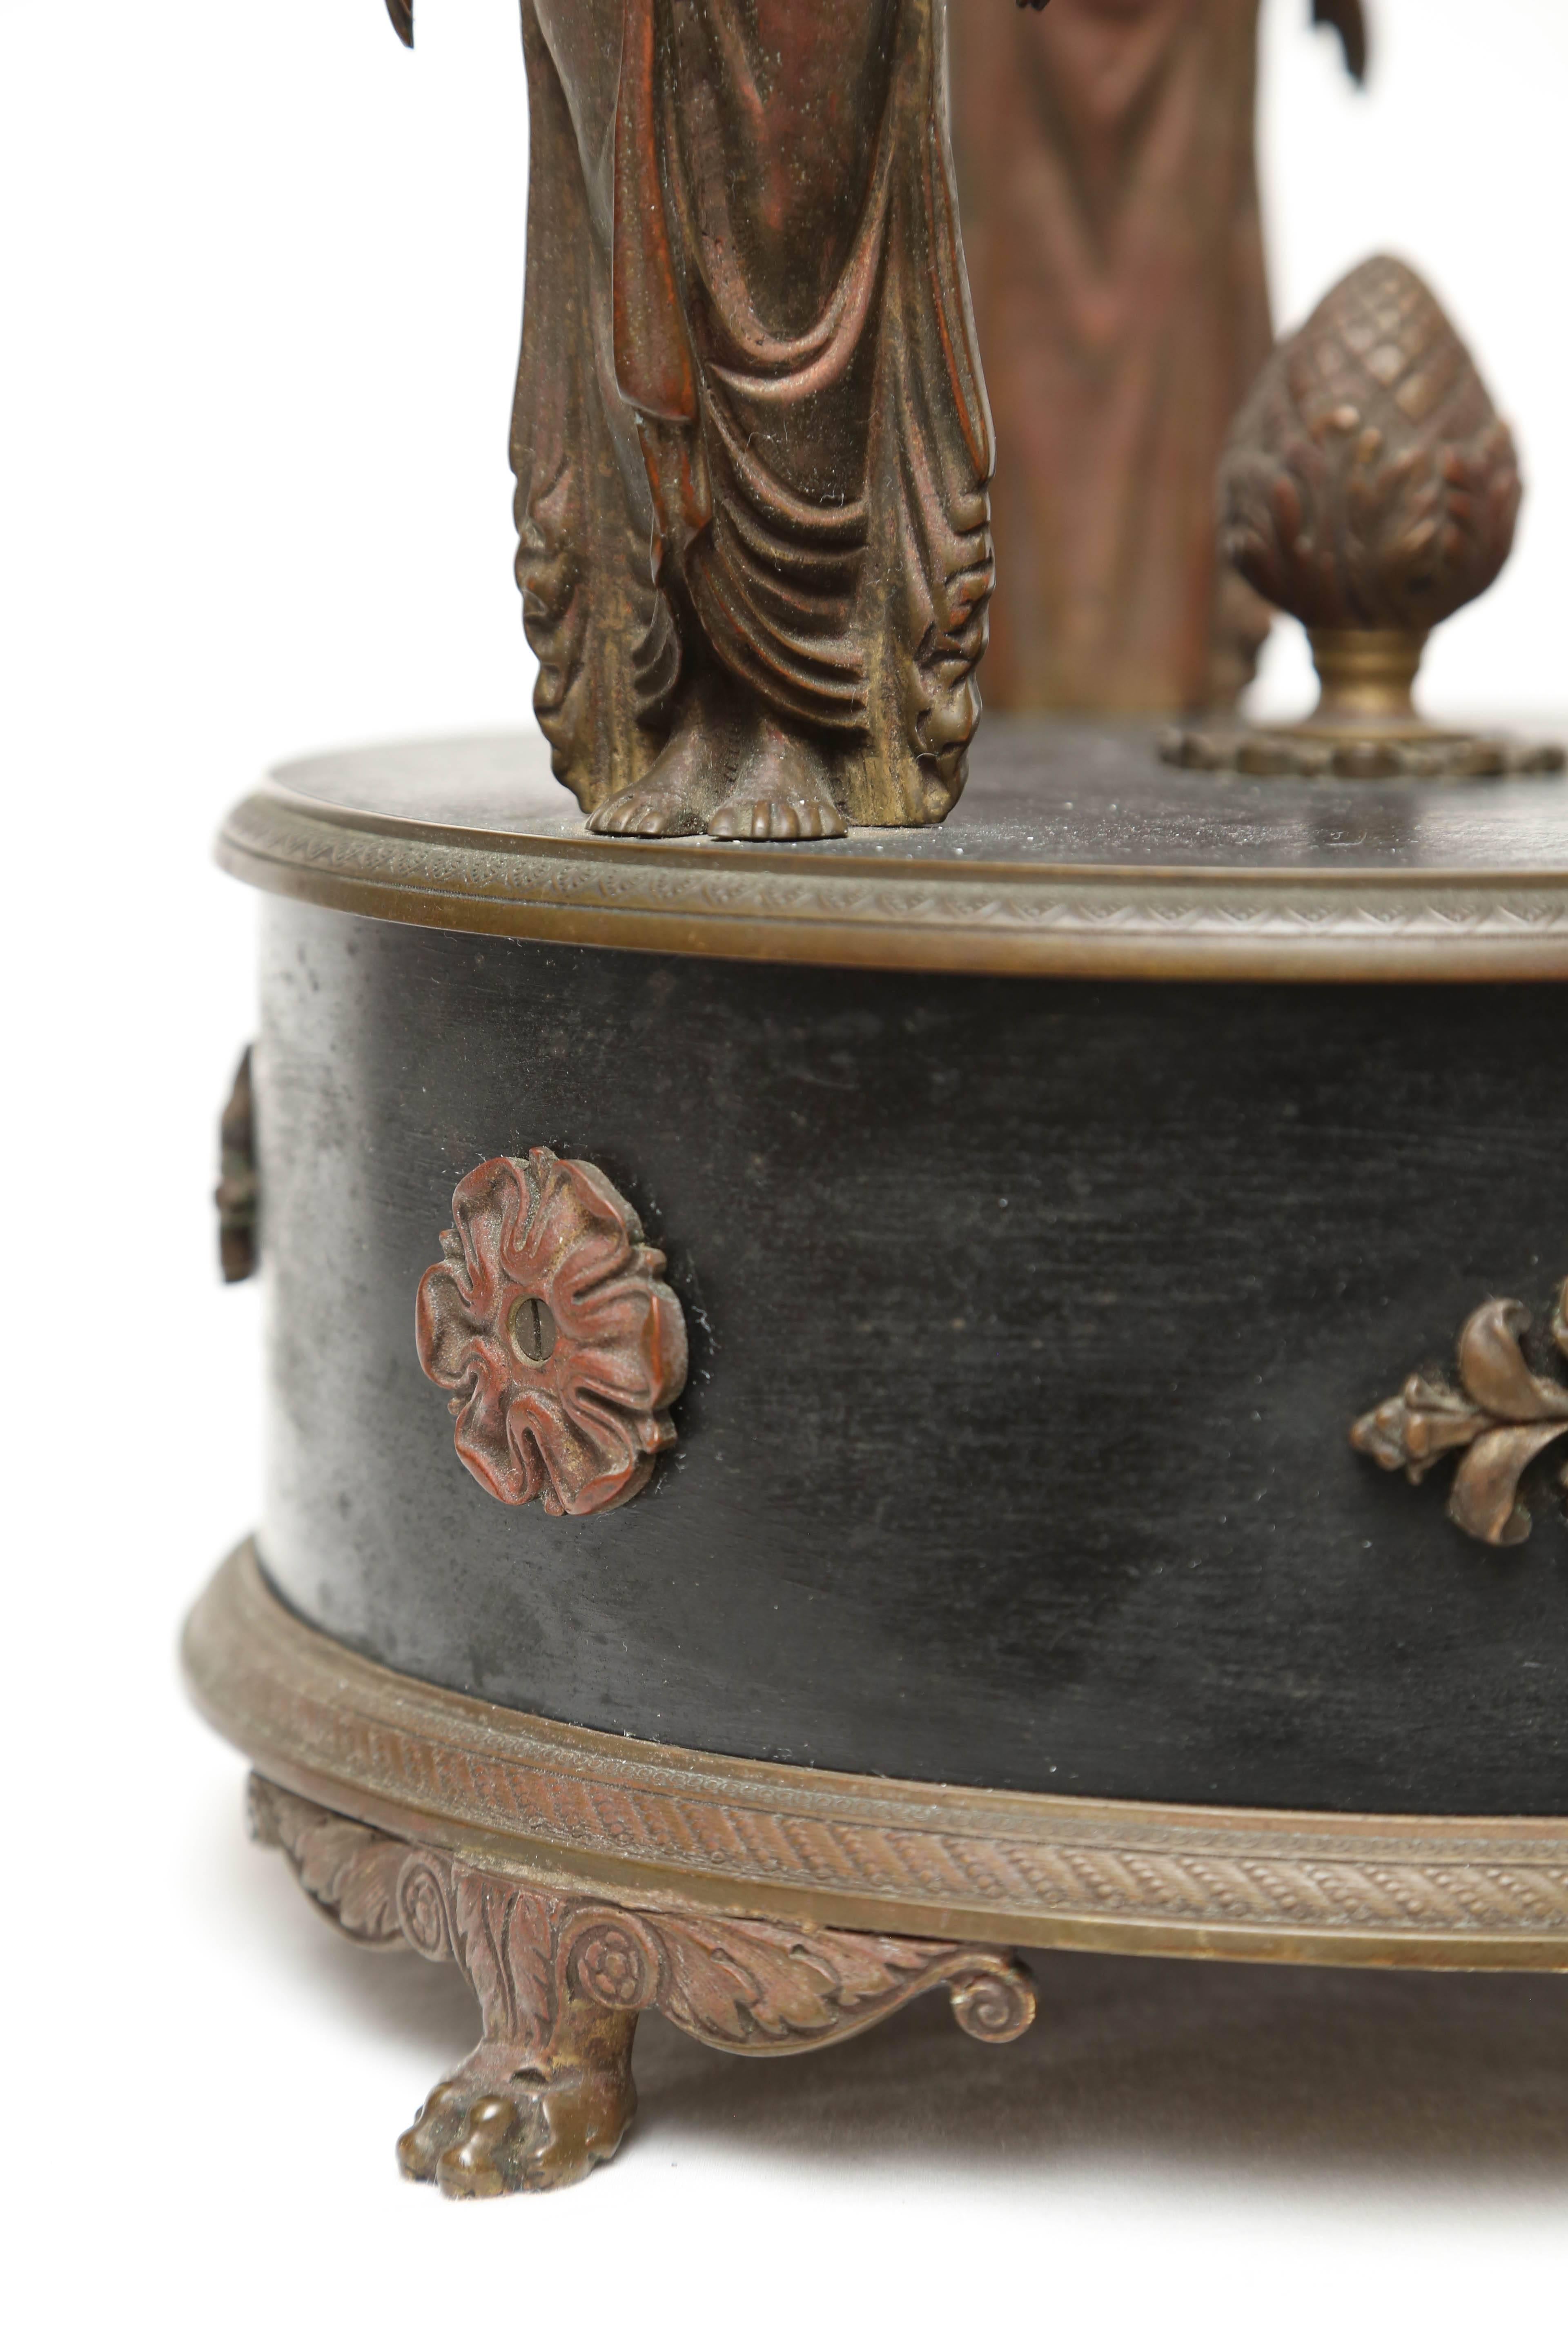 Grand scale.
The original diamond cut bowl is supported by three Greco-Roman figures.
A Classic neoclassic French form.